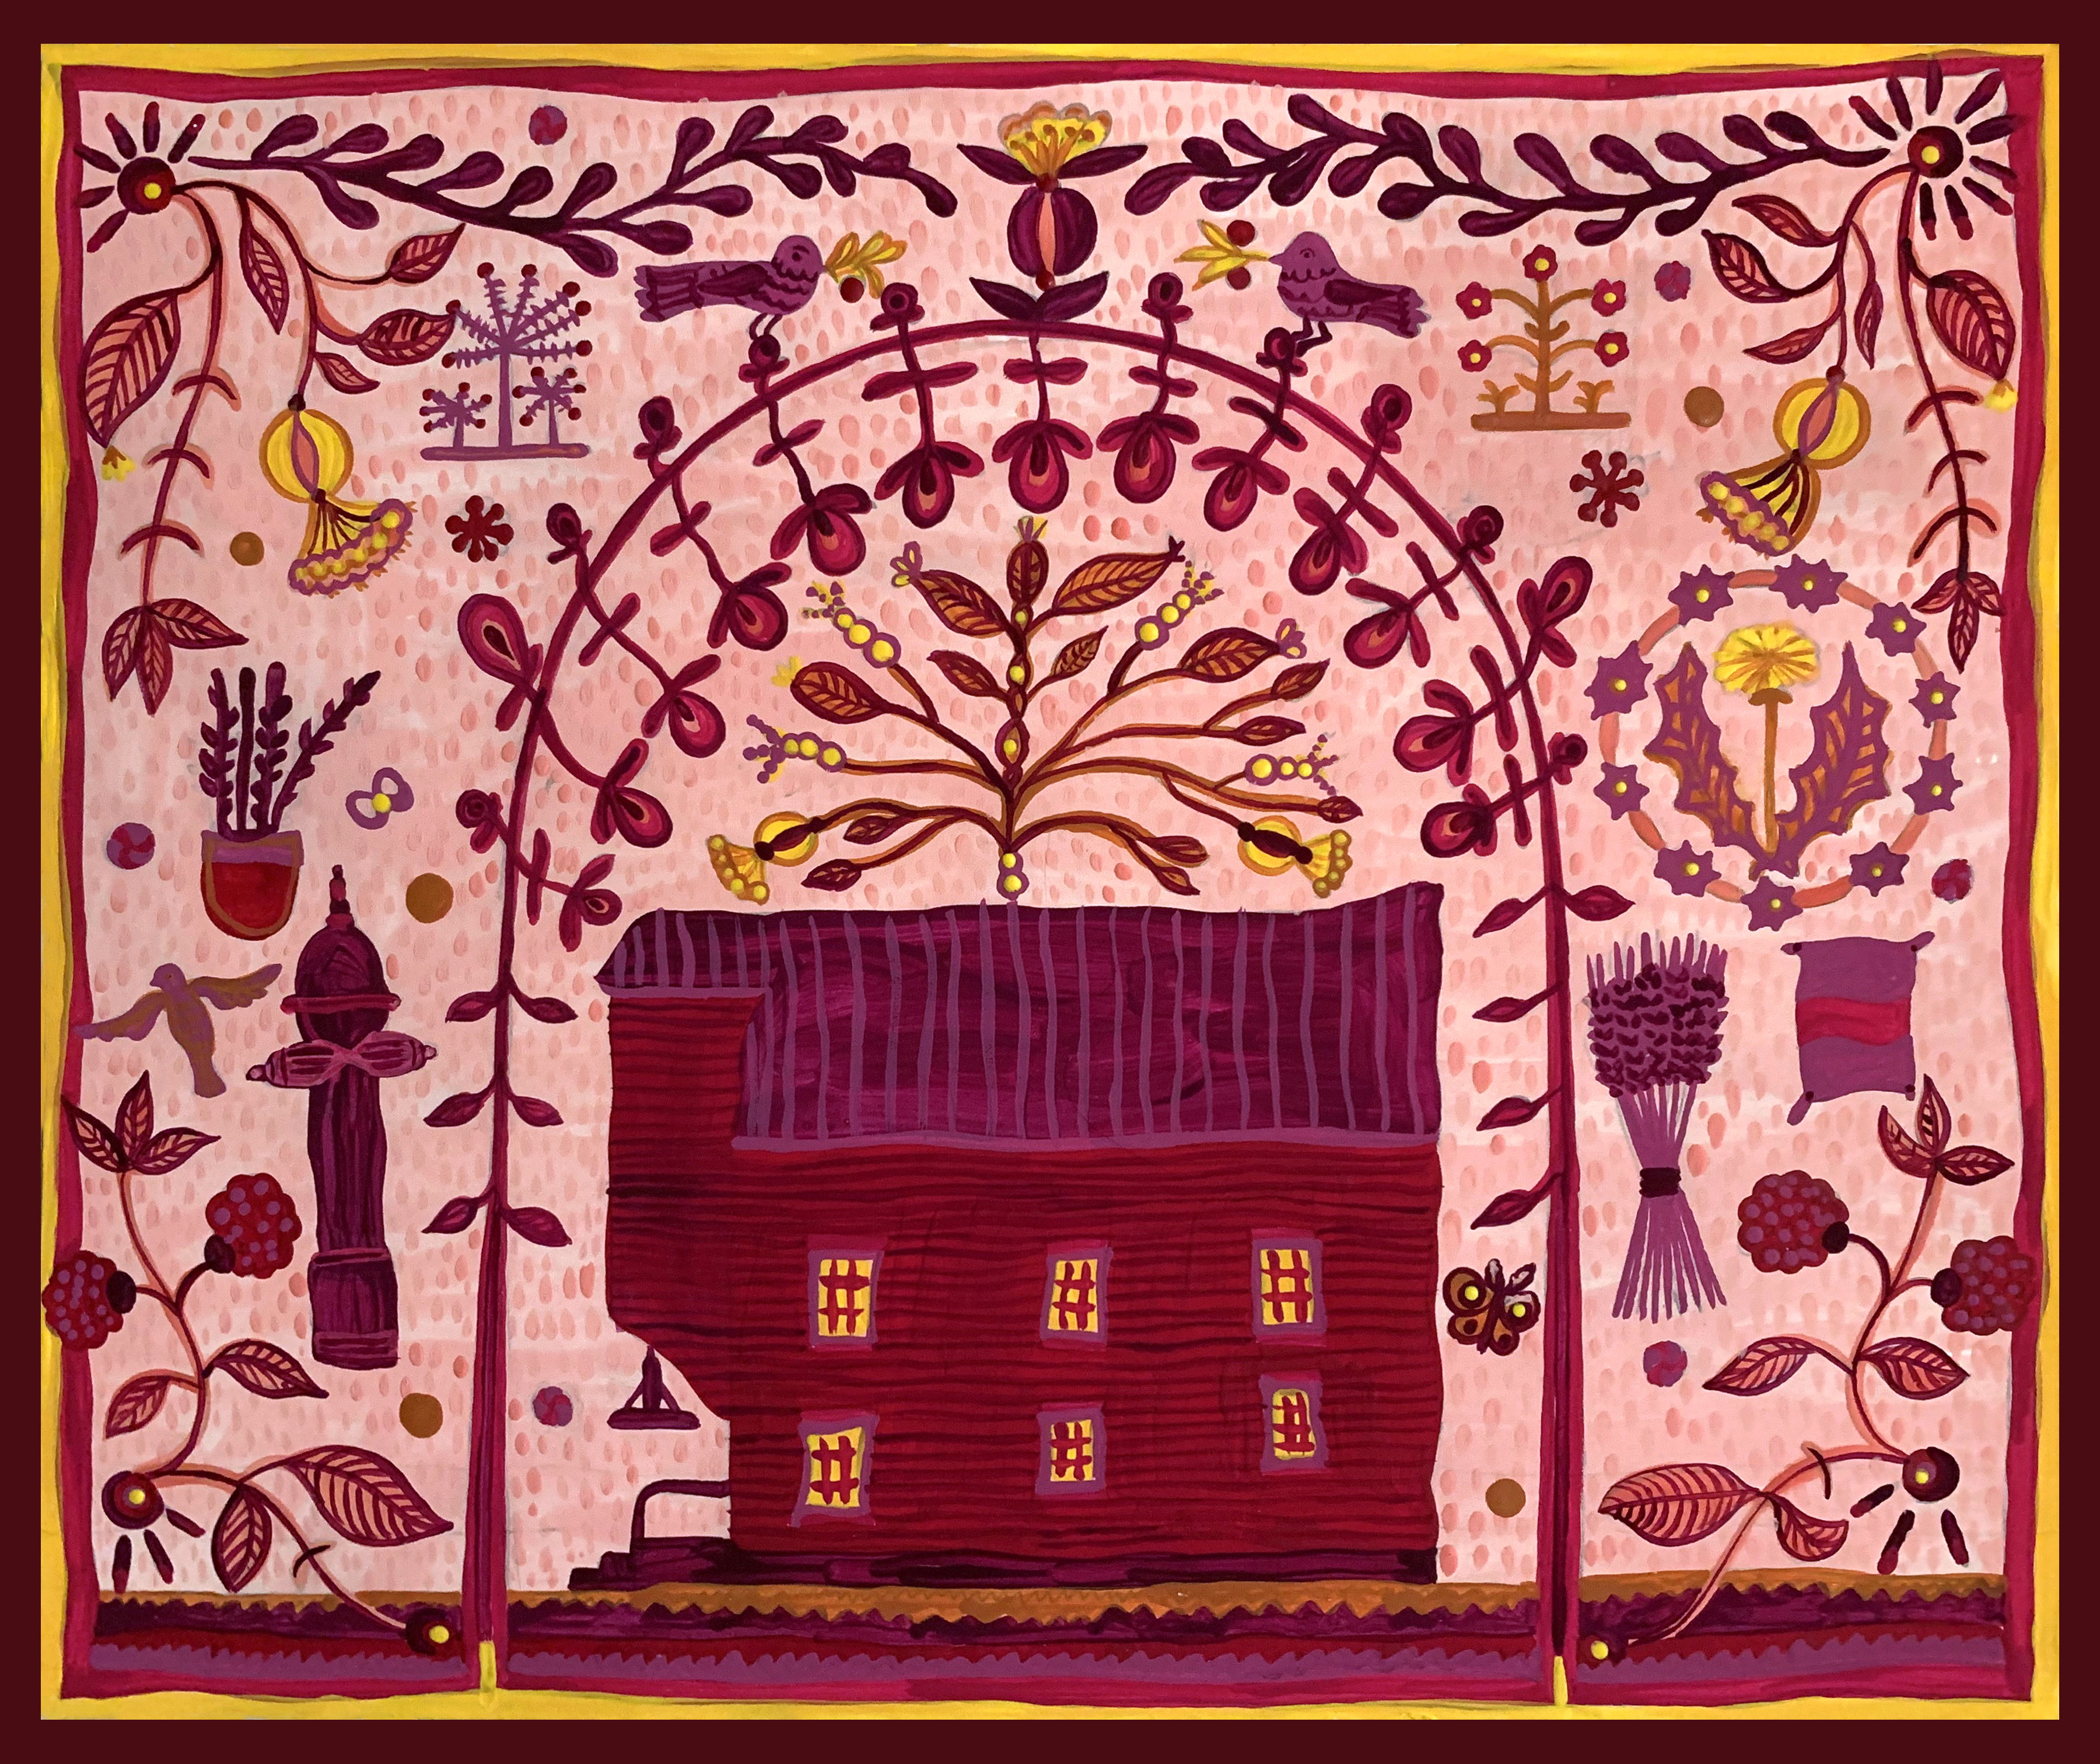 A red and purple tapestry with a house and flowers.